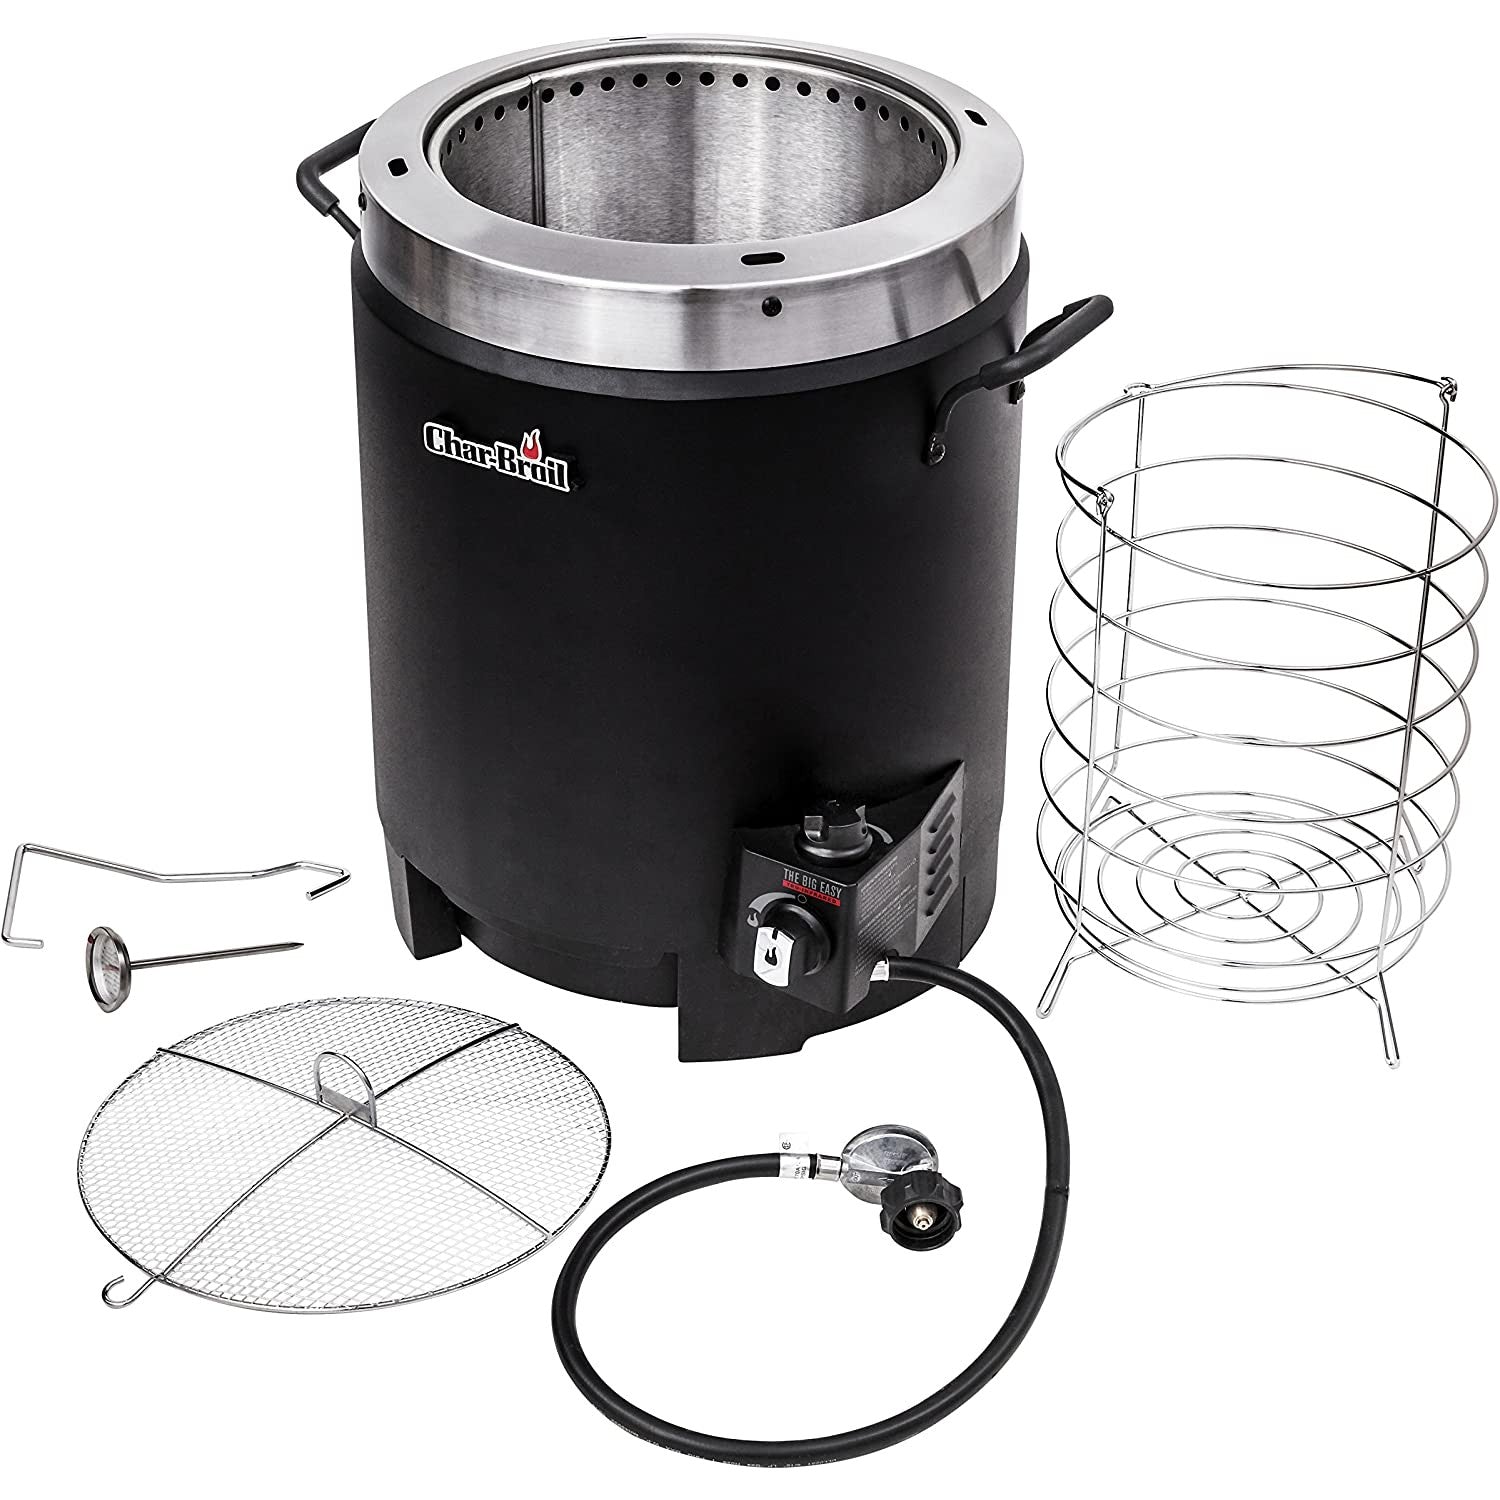 An oil-less liquid propane turkey fryer and all the various accessories that are included.